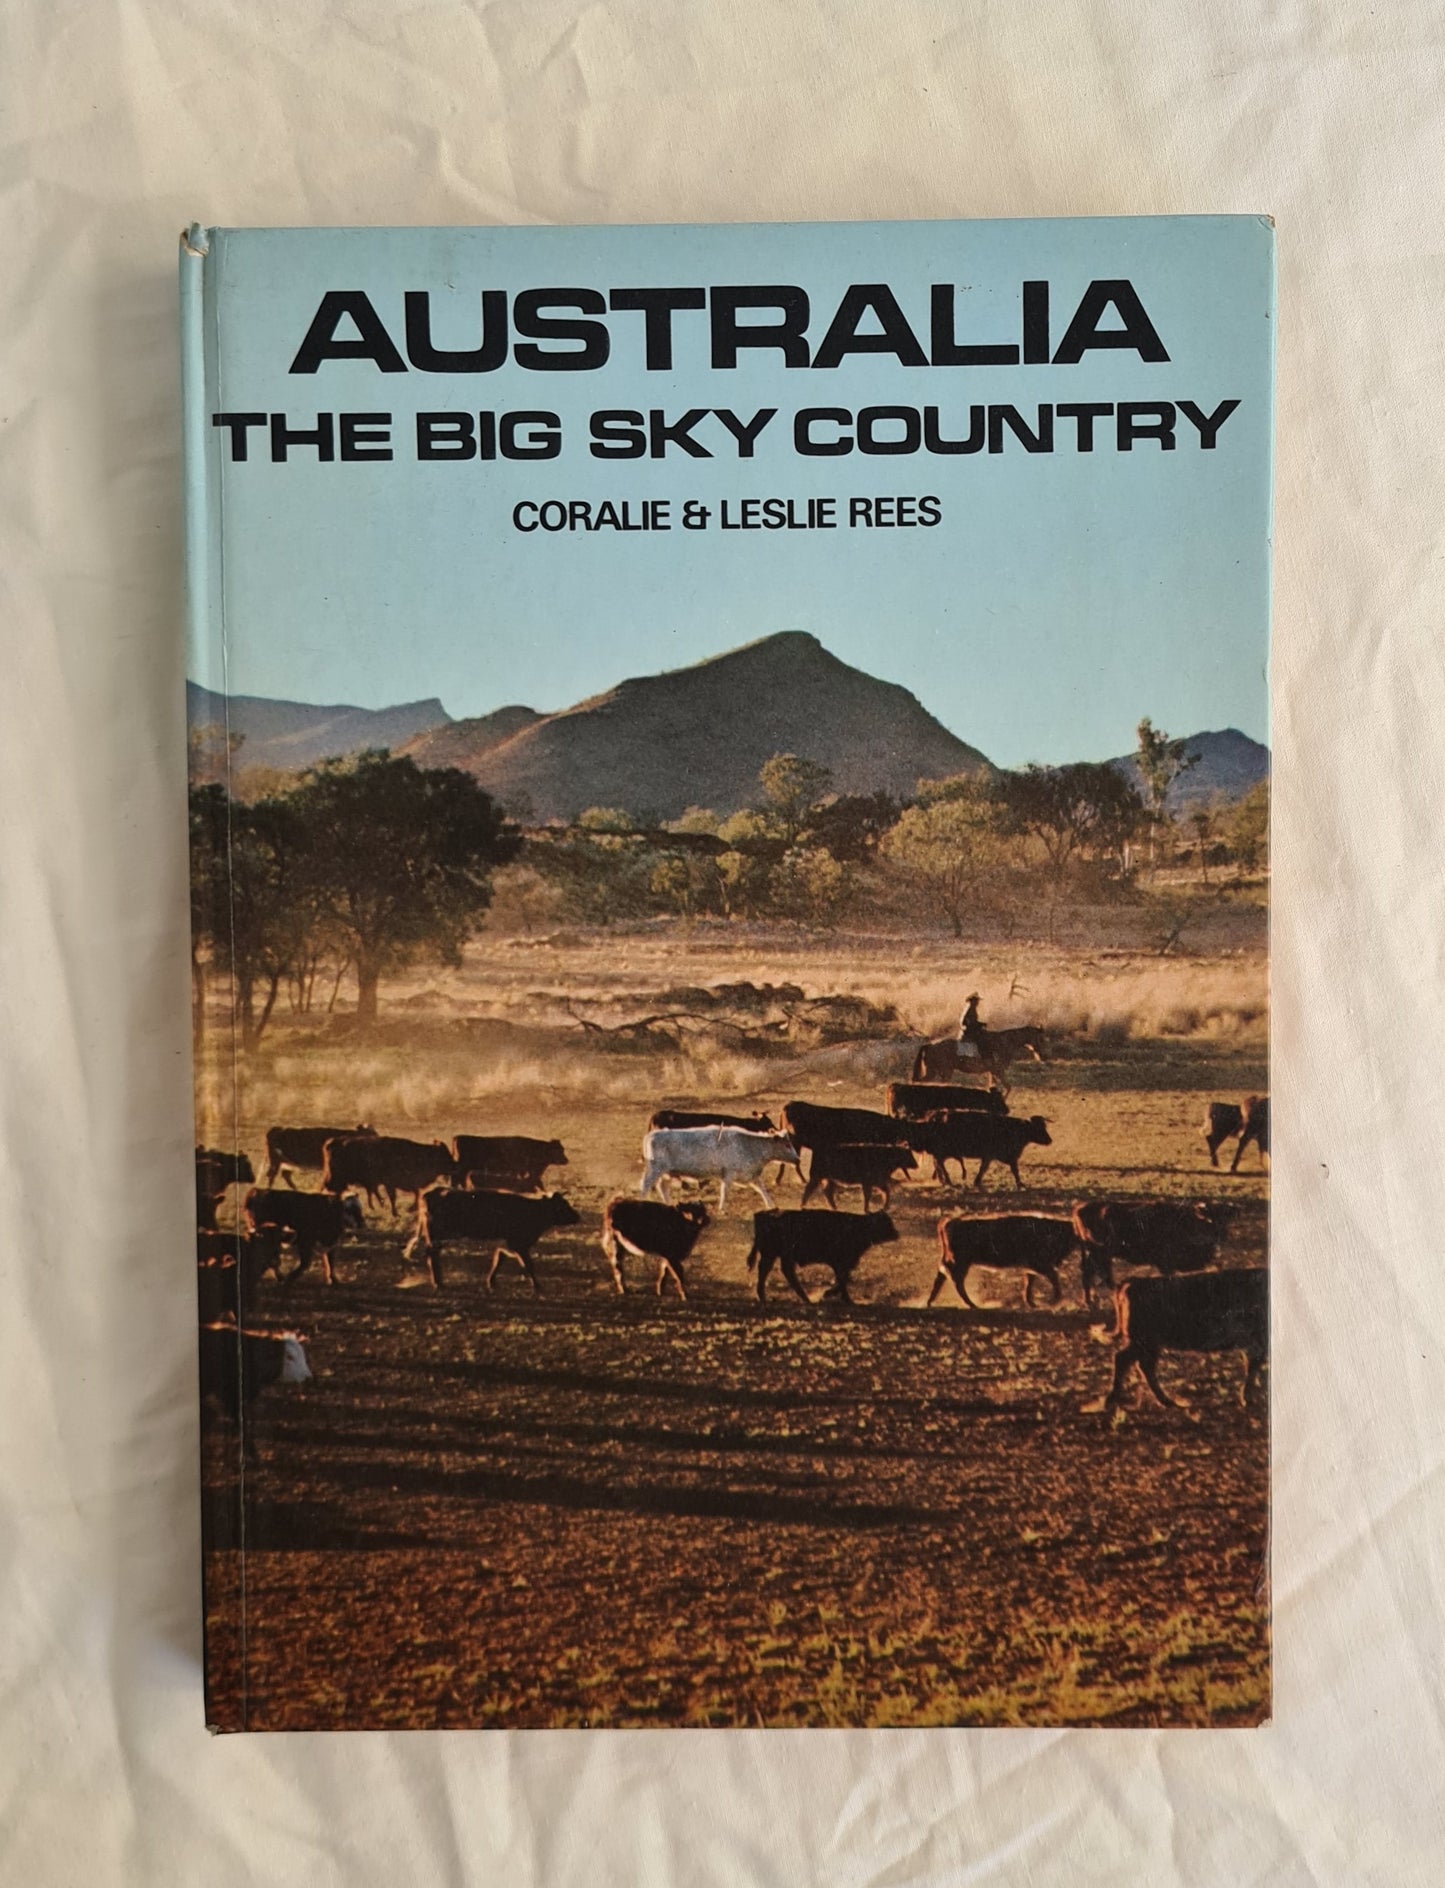 Australia The Big Sky Country  by Coralie and Leslie Rees